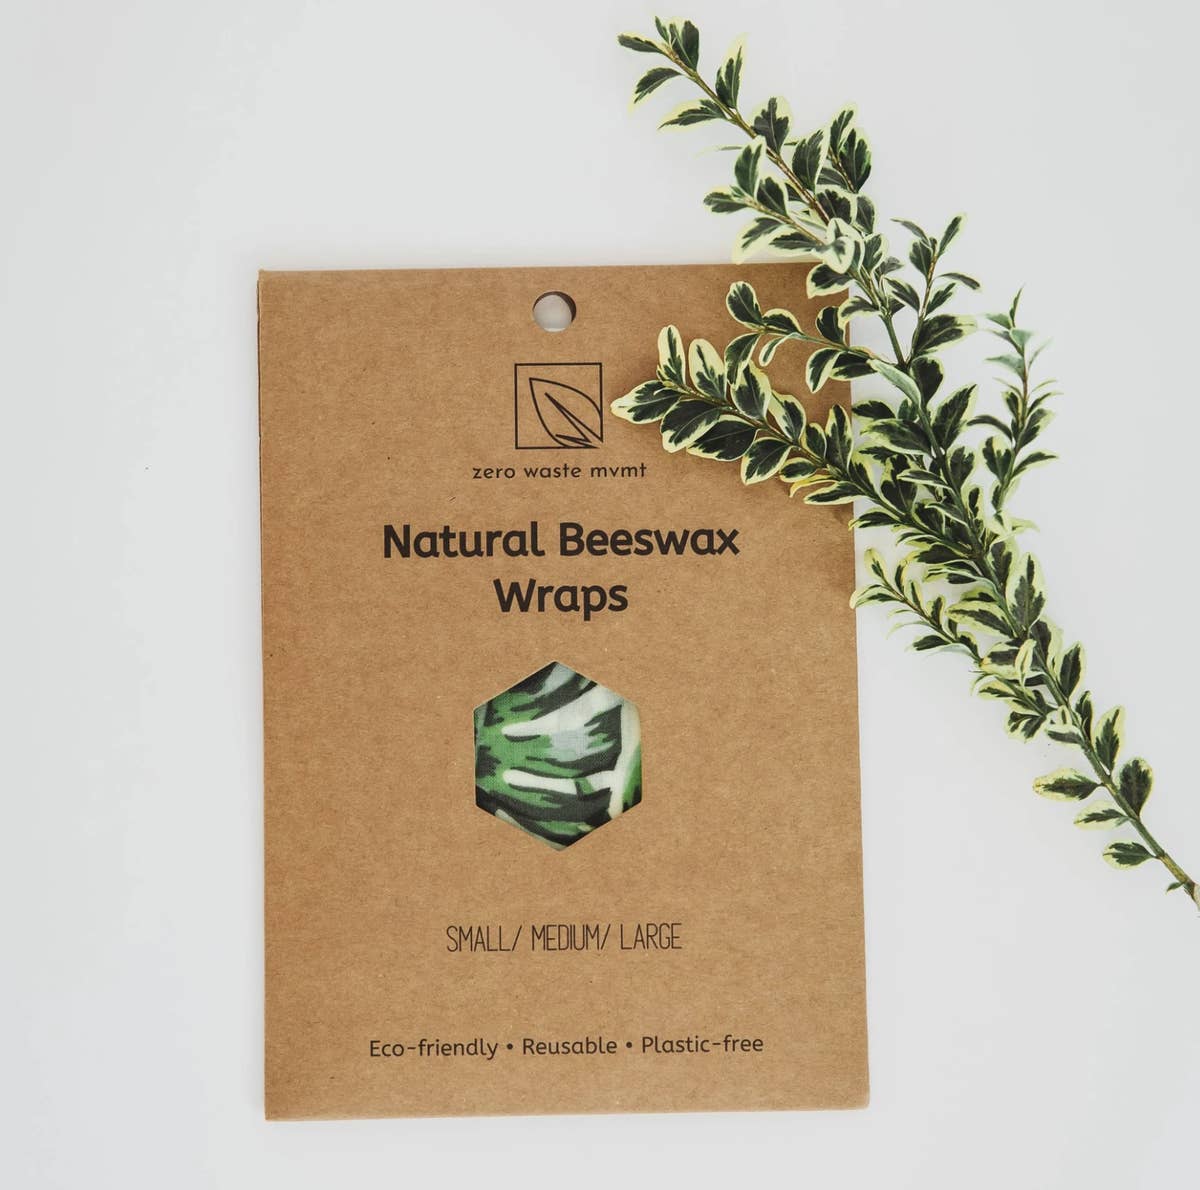 Zero Waste MVMT | Reusable Beeswax Food & Sandwich Wrap Made with Jojoba Oil & Tree Resin - 3 Pack, Gadgets and Gear, Zero Waste MVMT, Defiance Outdoor Gear Co.